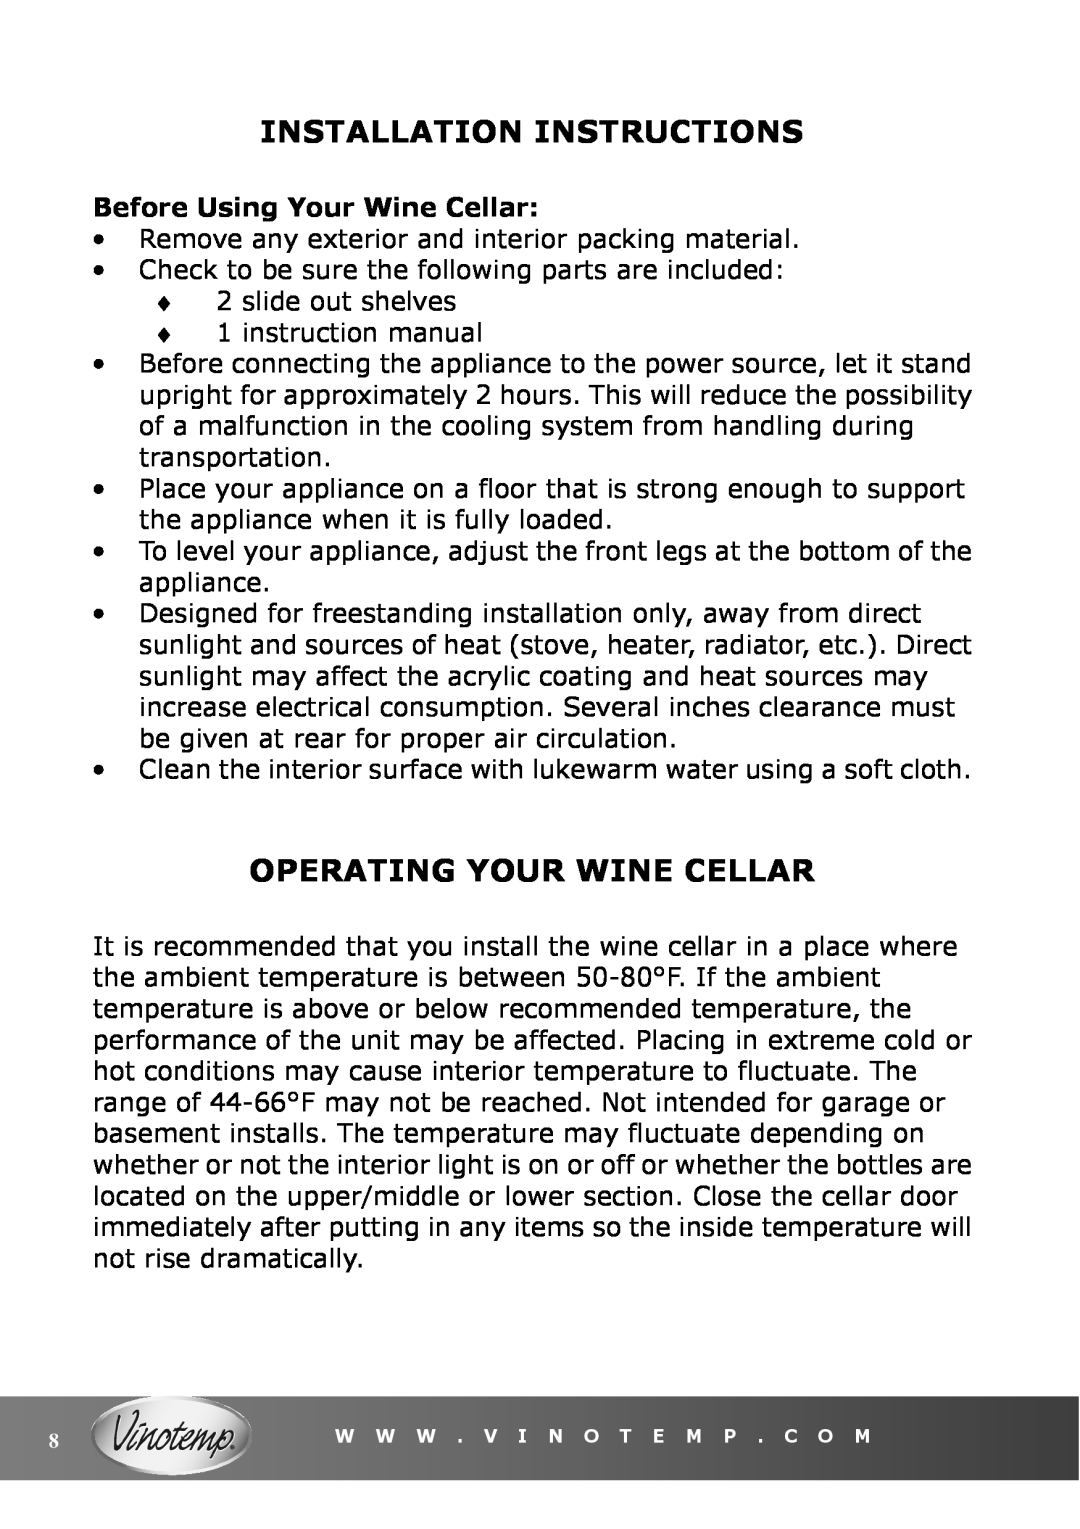 Vinotemp VT-6TEDS owner manual Installation Instructions, Operating Your Wine Cellar, Before Using Your Wine Cellar 